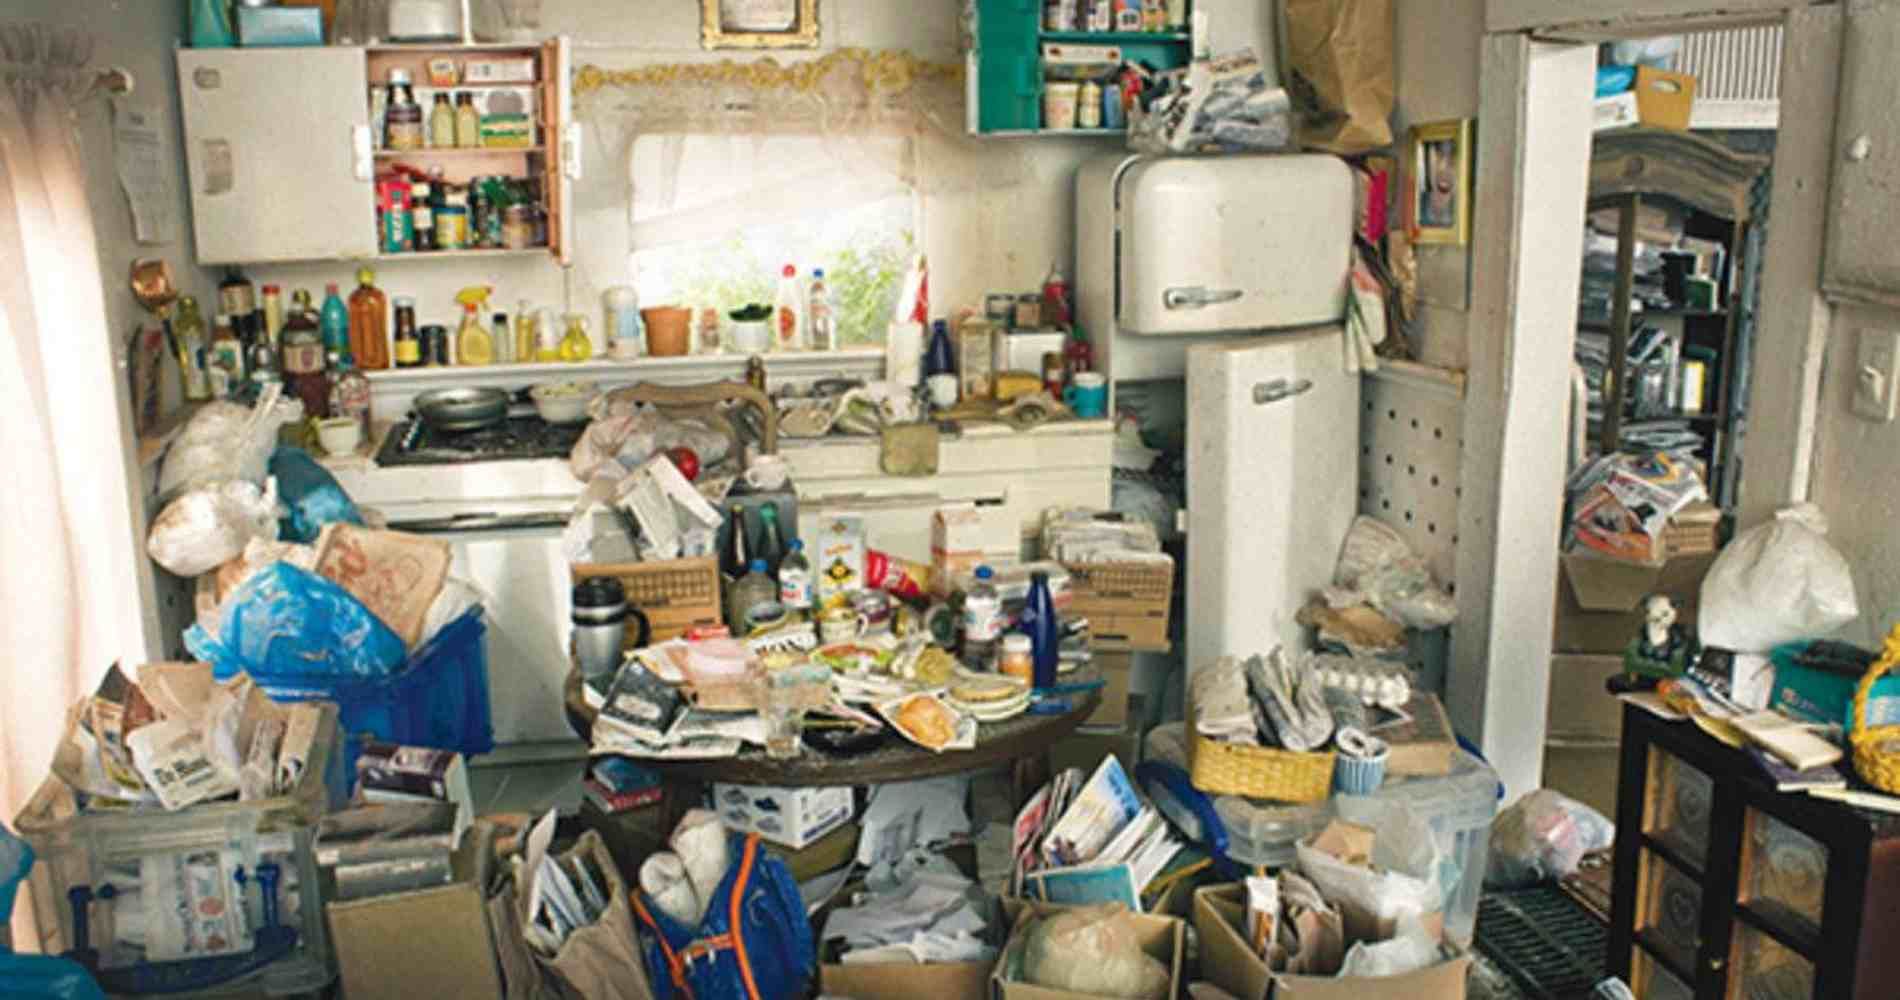 #1 for Hoarding Cleanup in Peoria, AZ with Over 1200 5-Star Reviews!